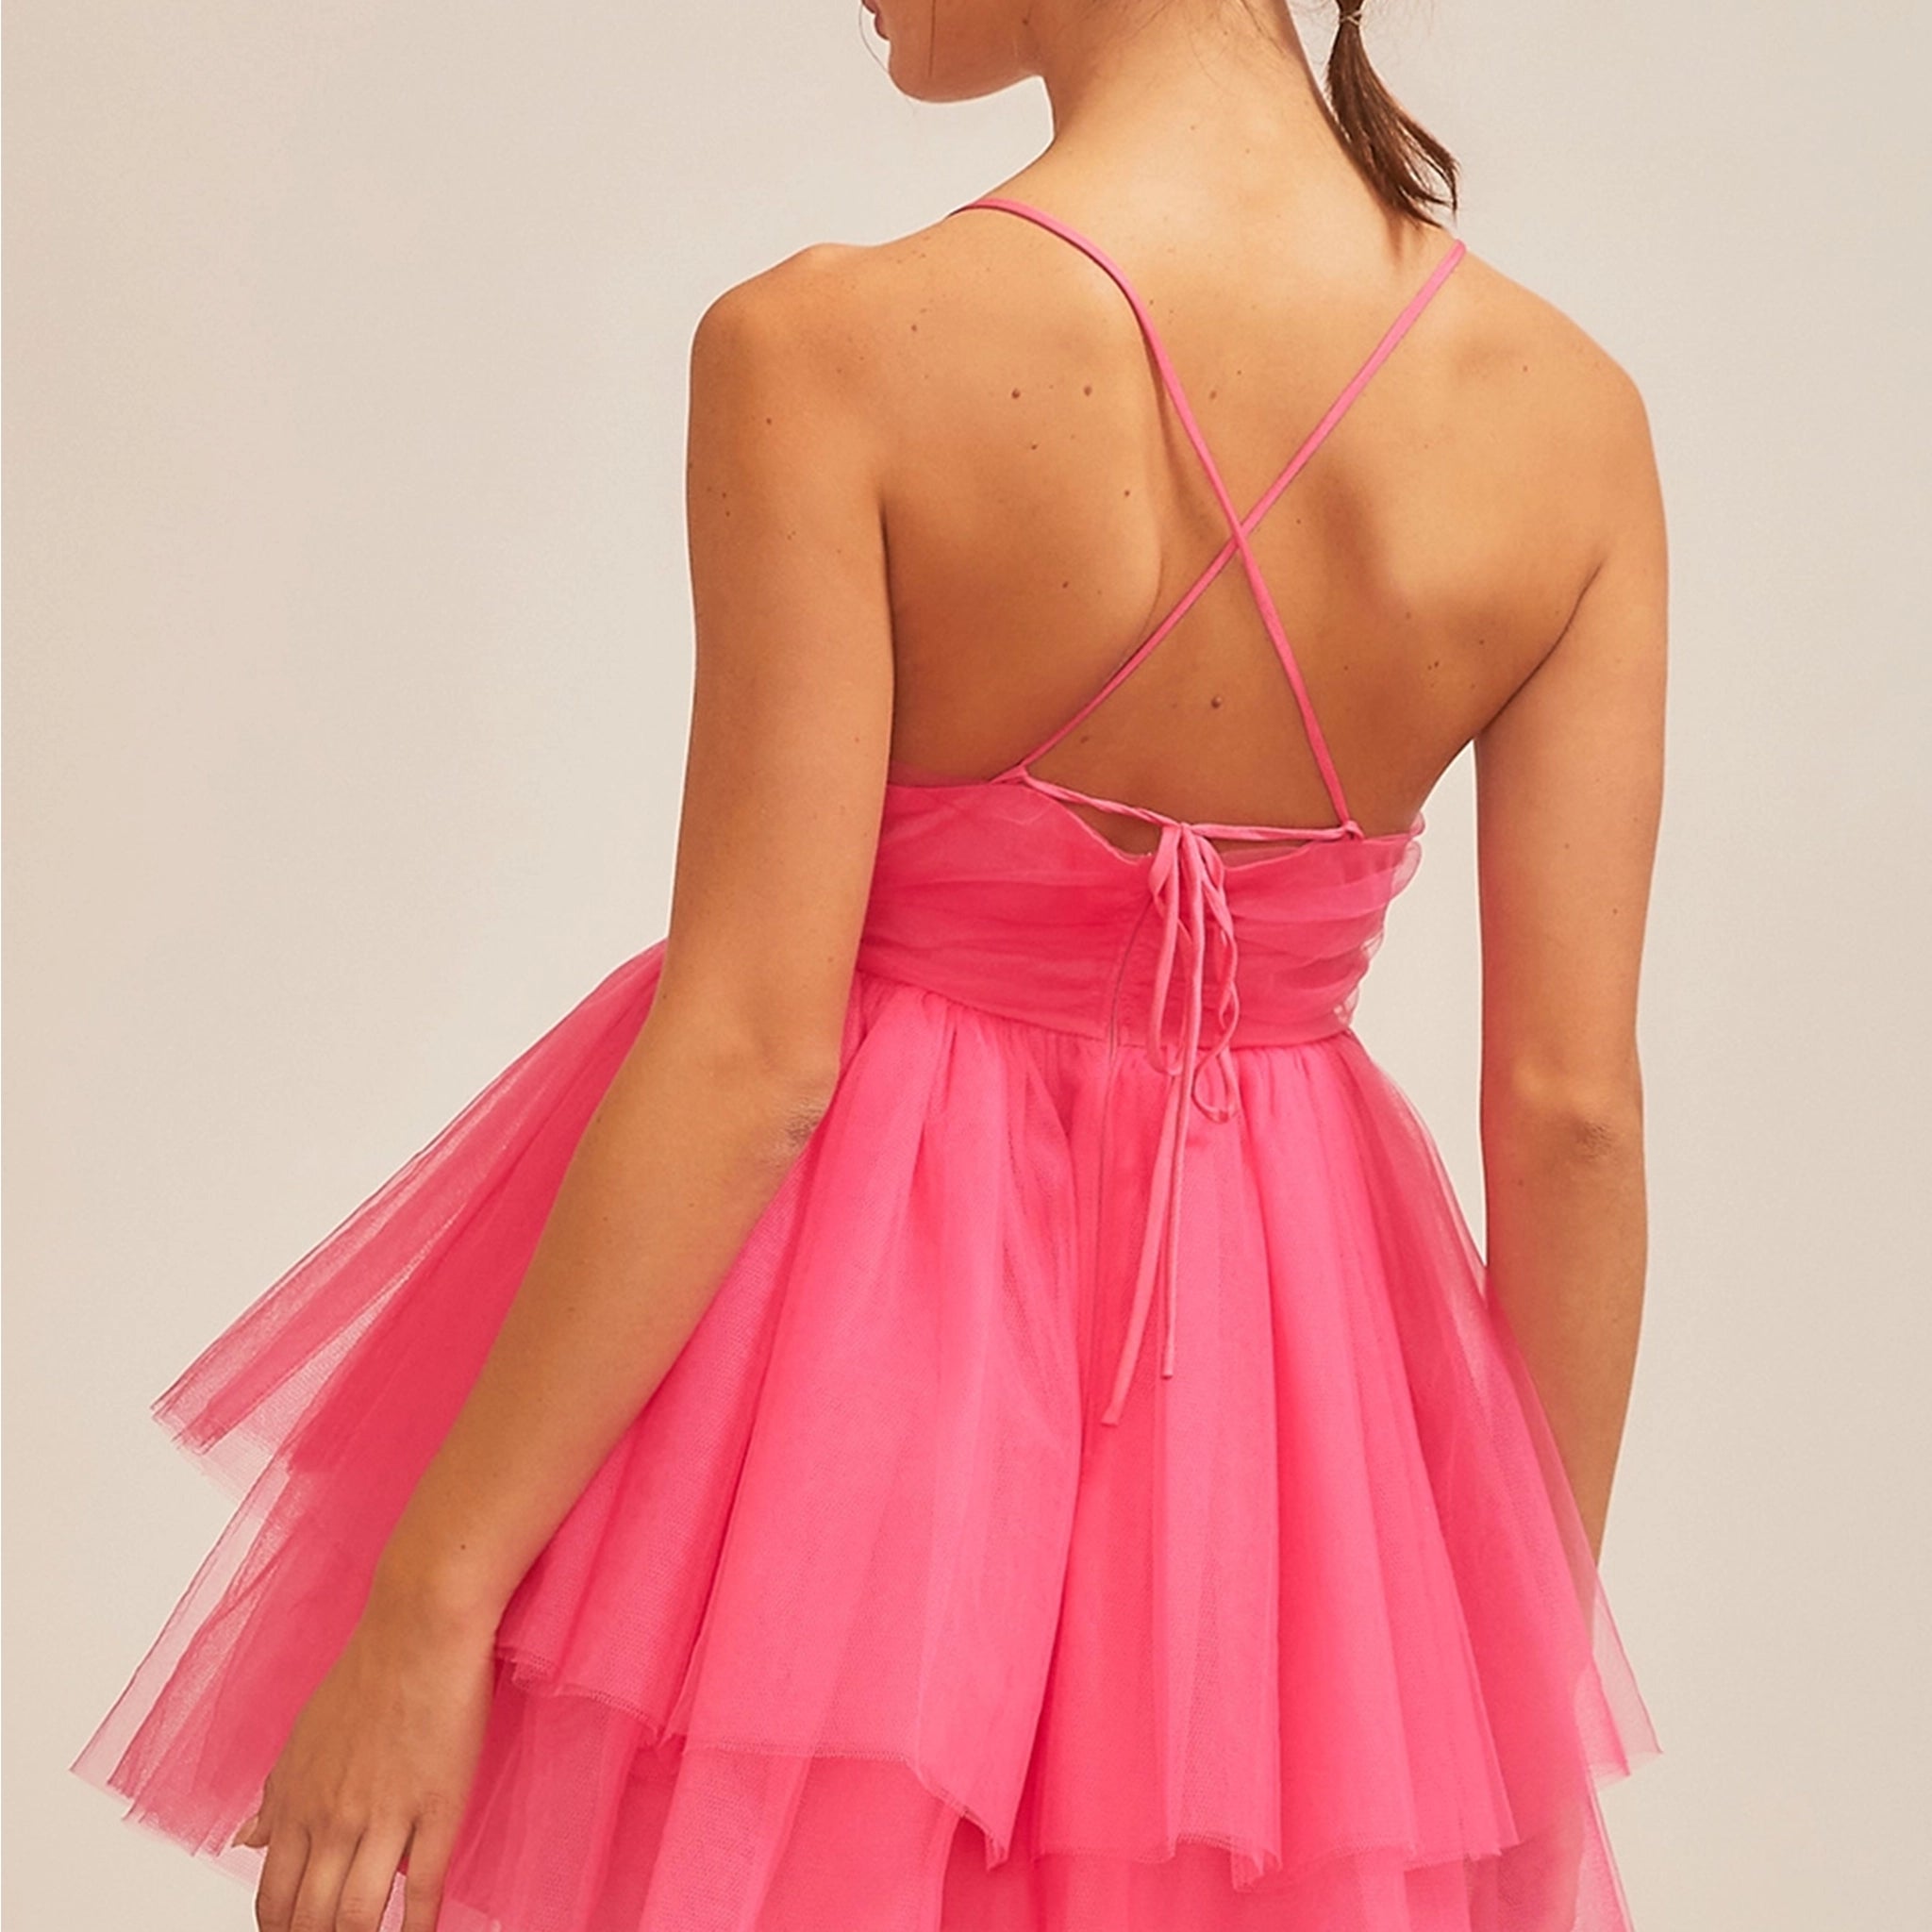 Ready To Party Babydoll Dress In Hot Pink • Impressions Online